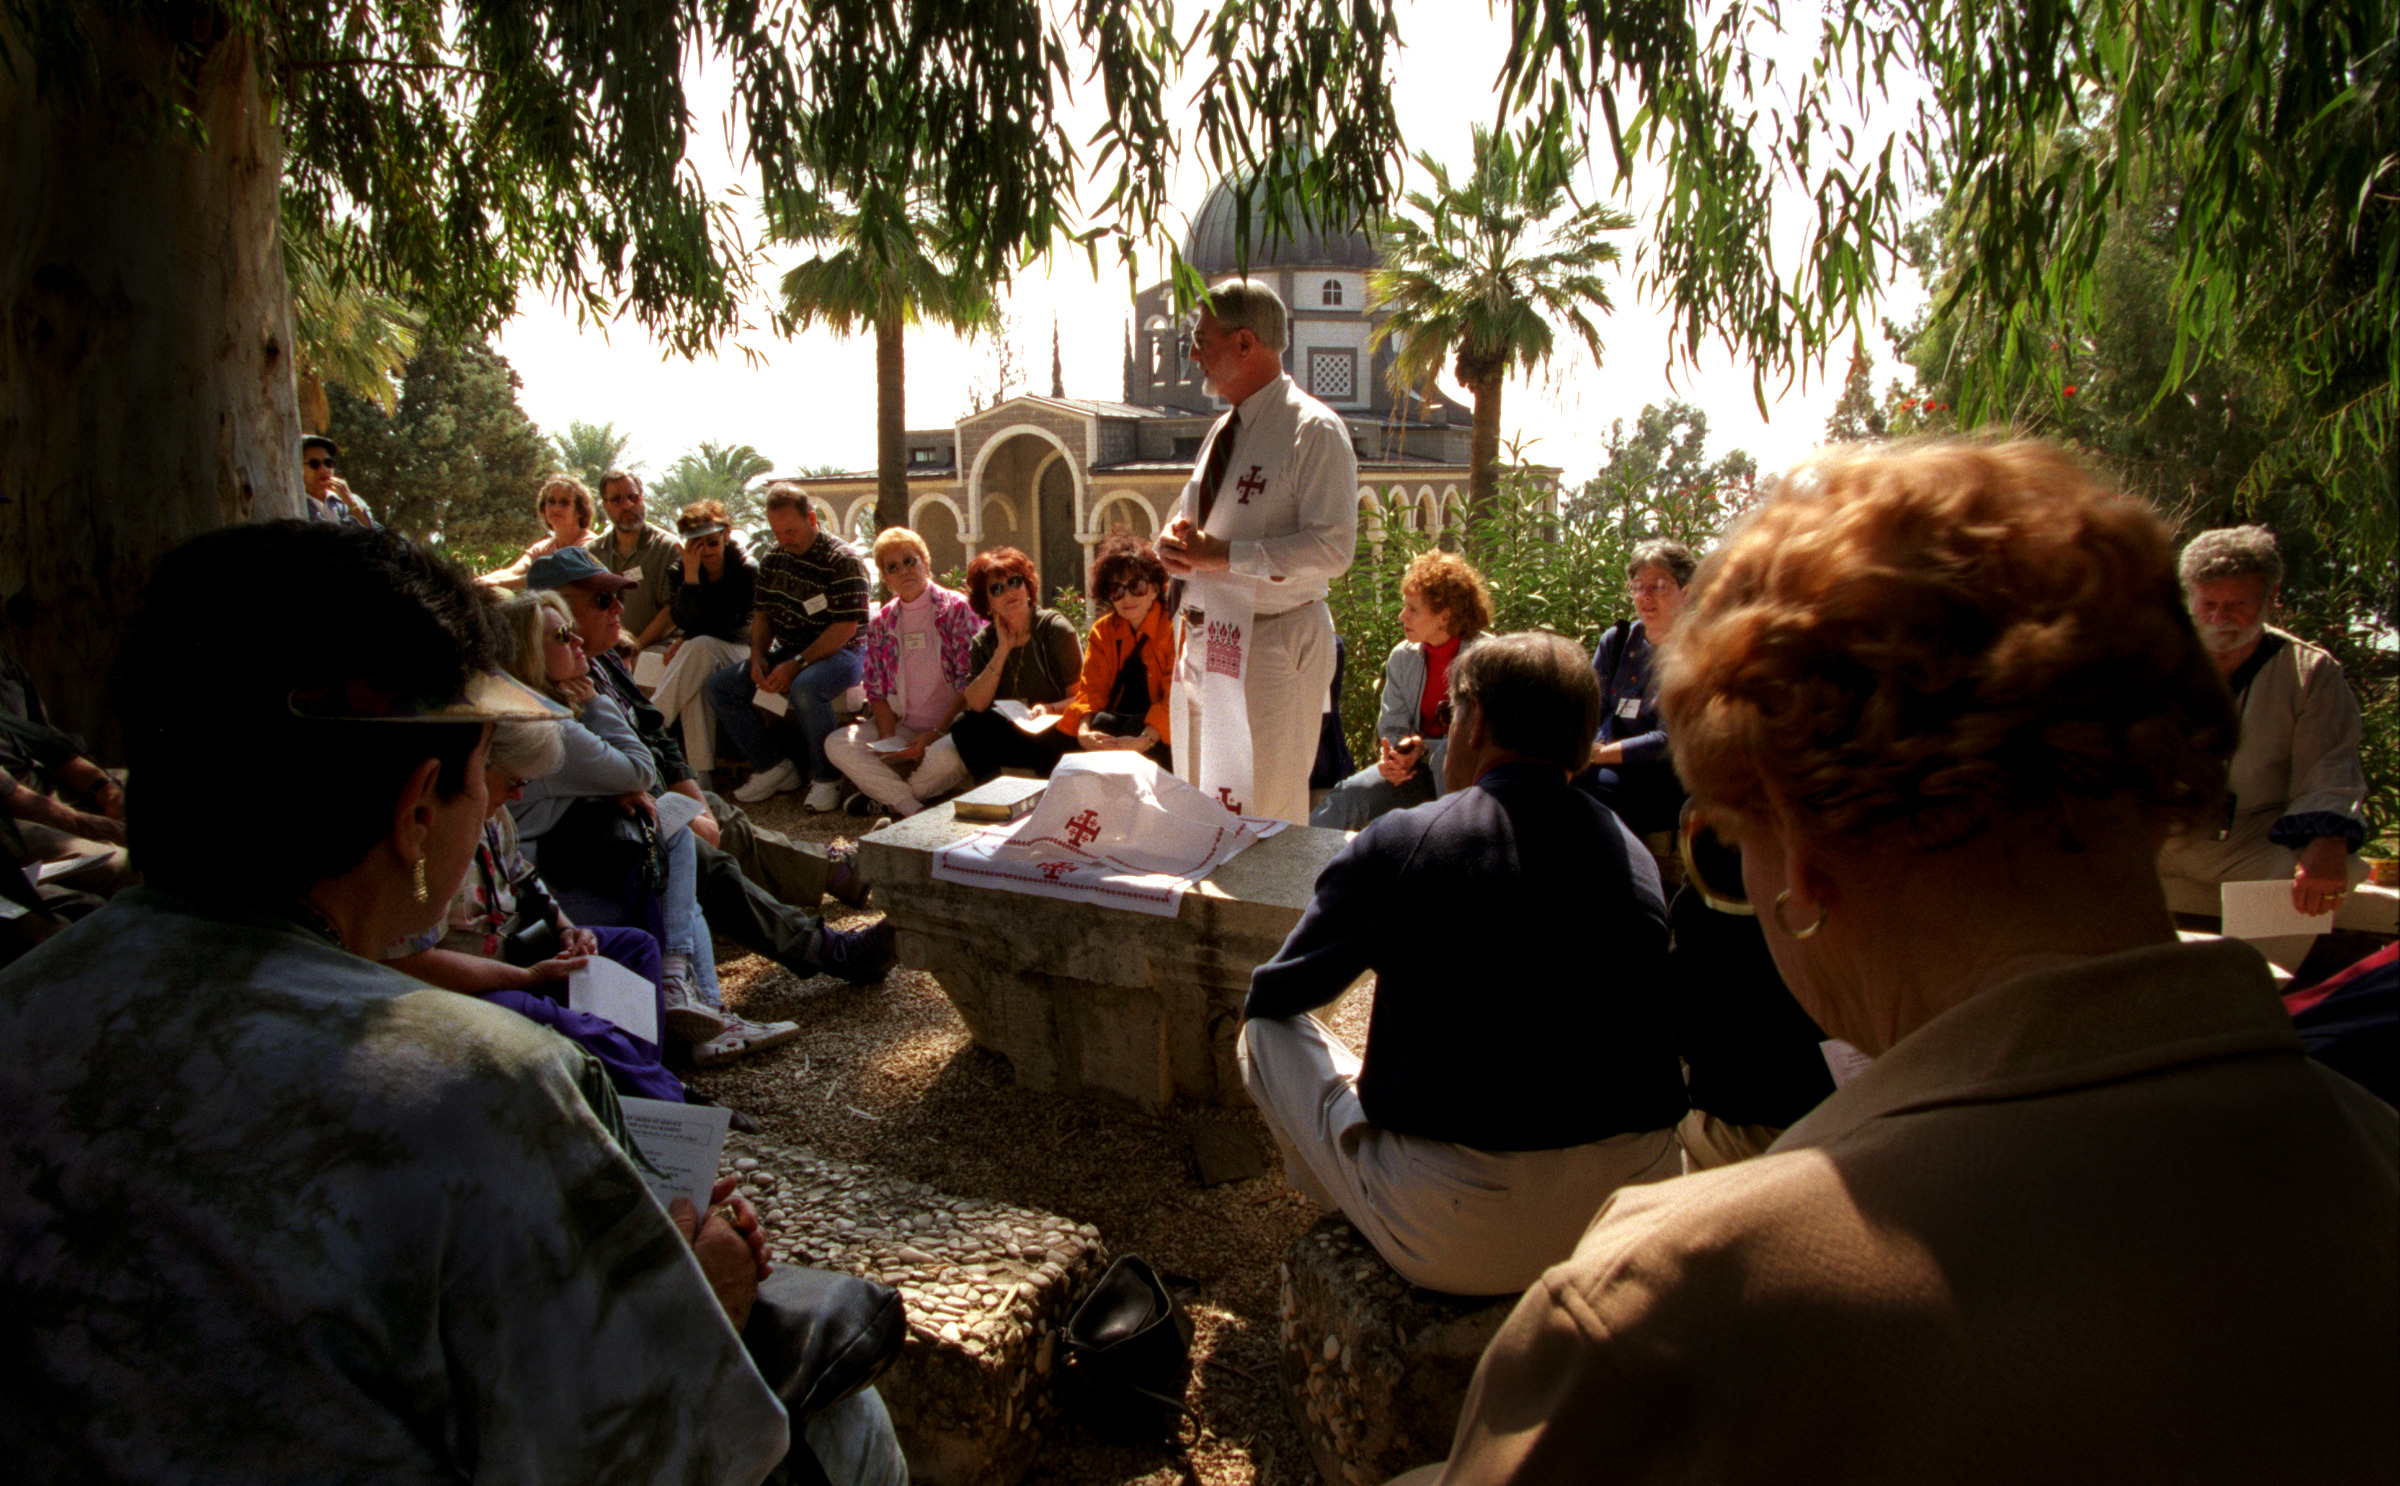  It was on this mountain, overlooking the Sea of Galilee, that Jesus gave the "Sermon on the Mount" And it was here, during the Holy Land visit, that Rev. Robert Shepard led Sunday service on Mt. Beatitudes to Orange County Interfaith group of Jews, 